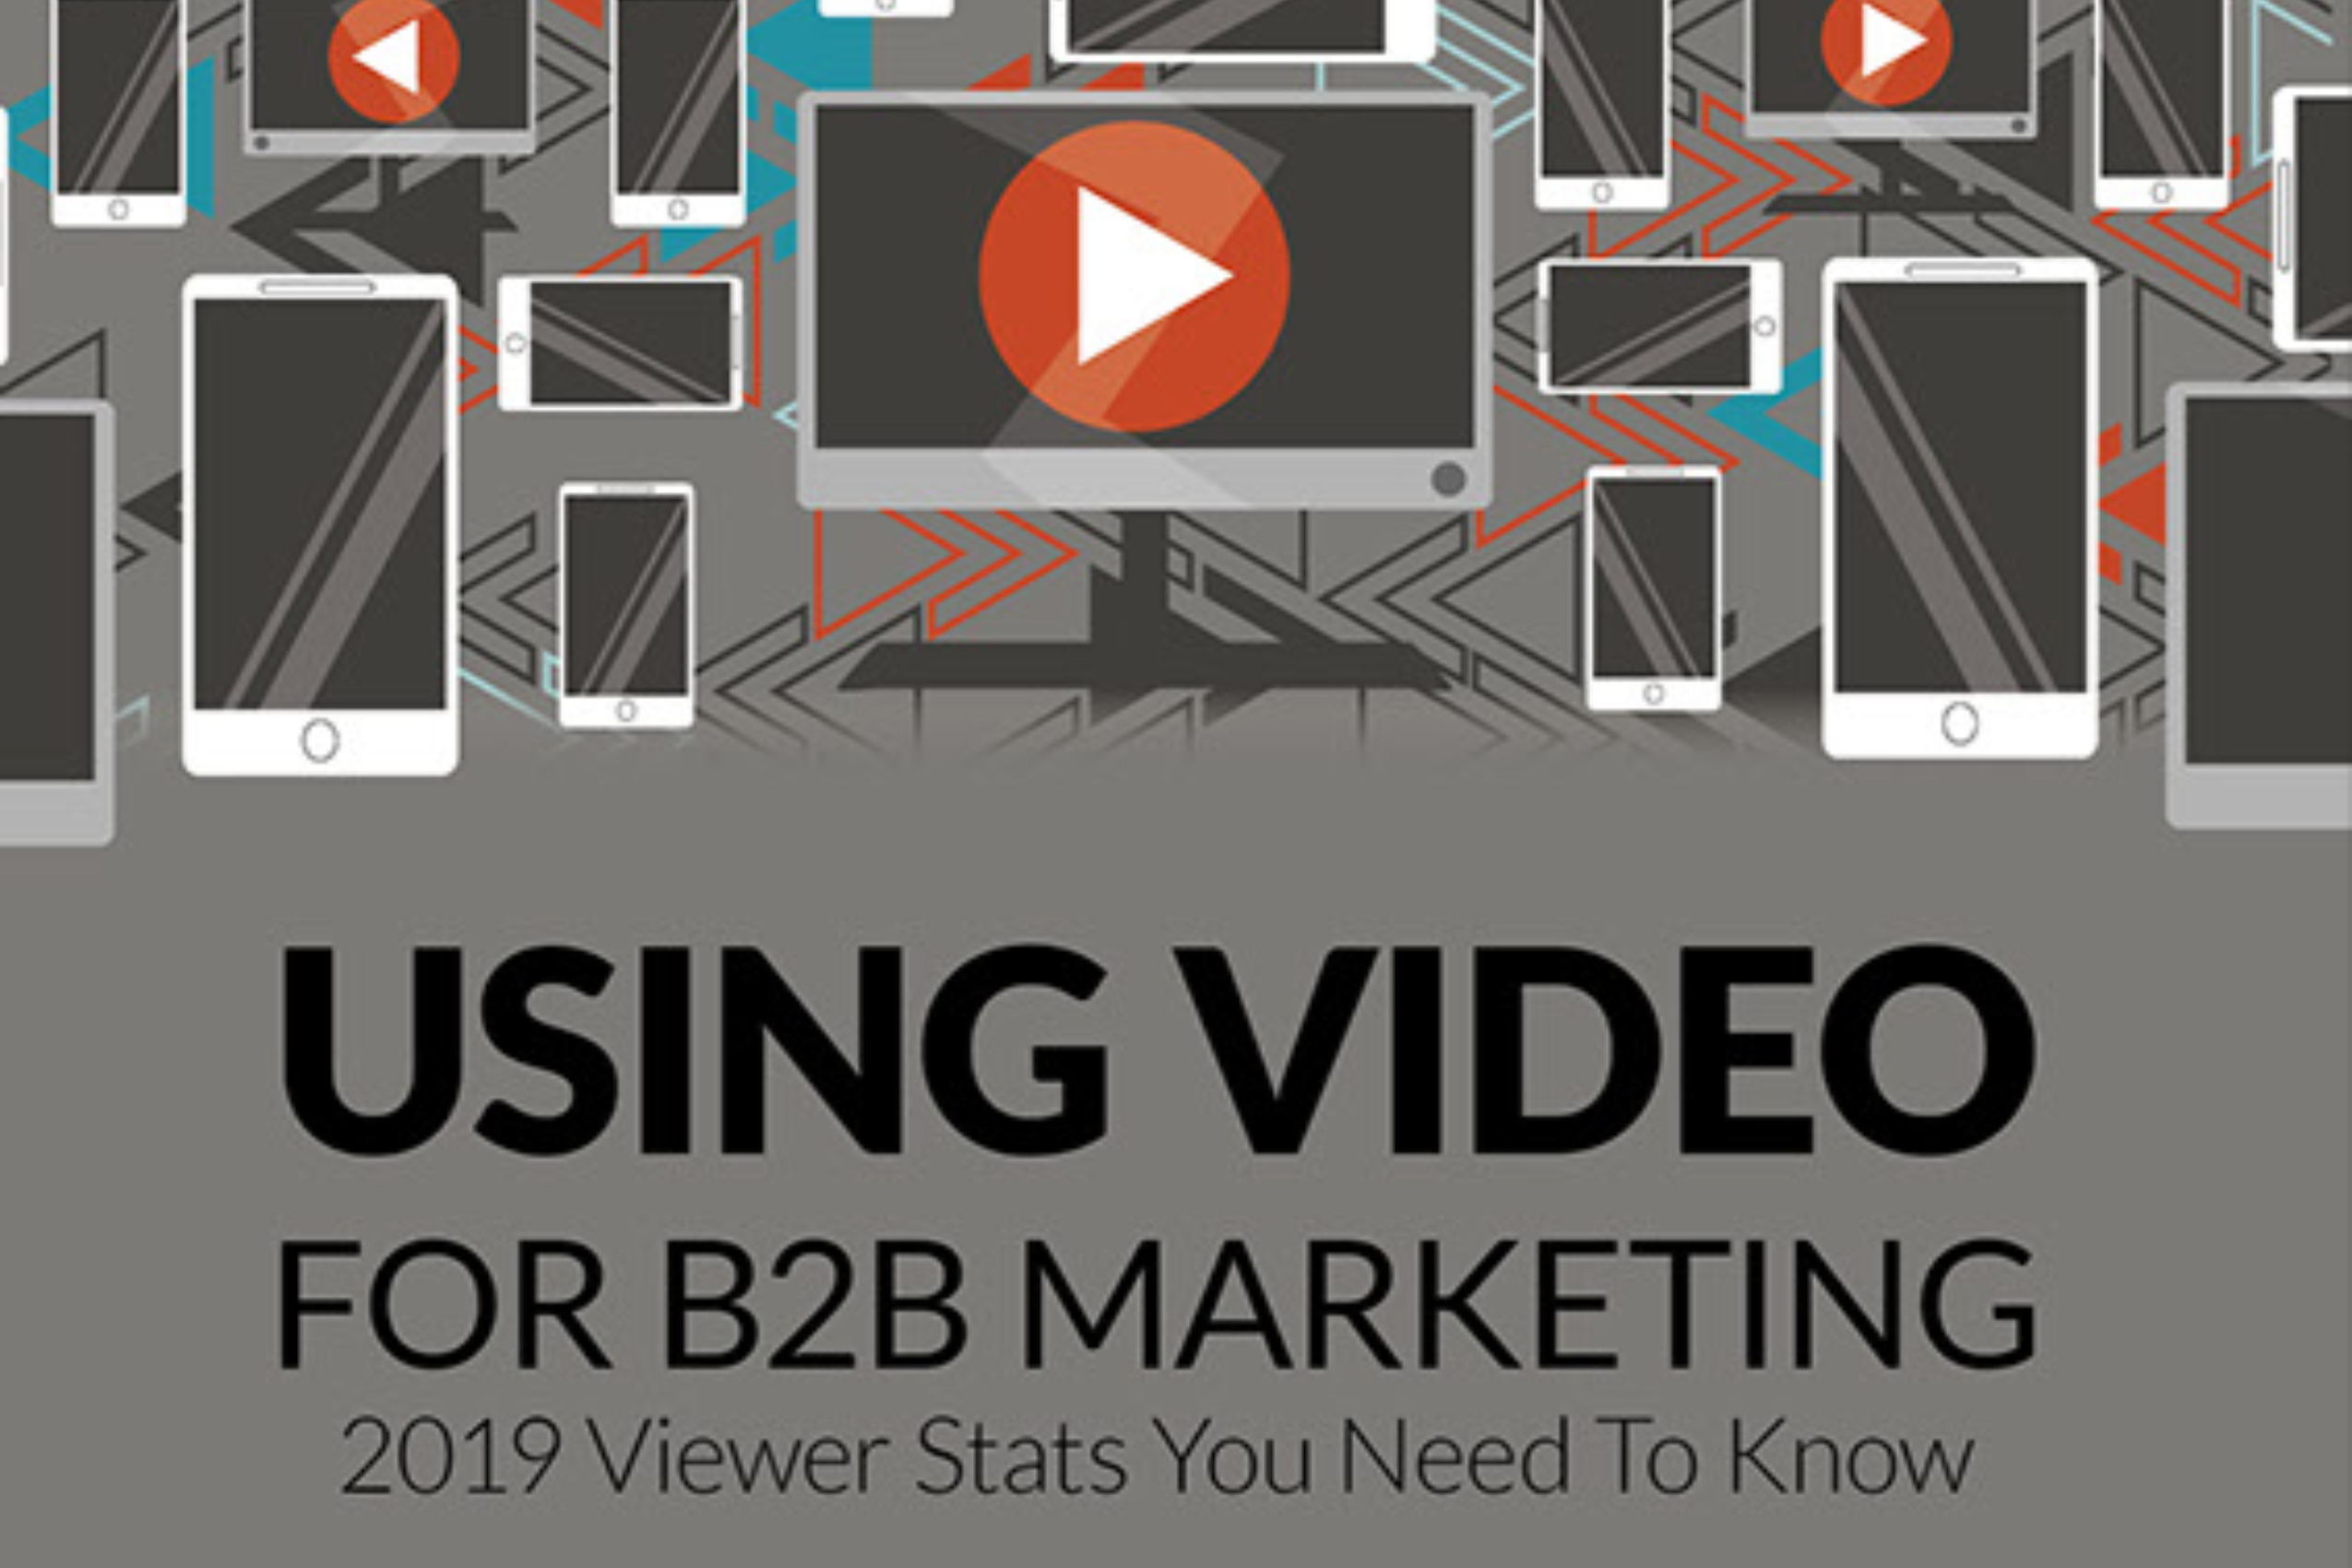 Using Video For B2B Marketing: 2019 Viewer Stats (infographic)